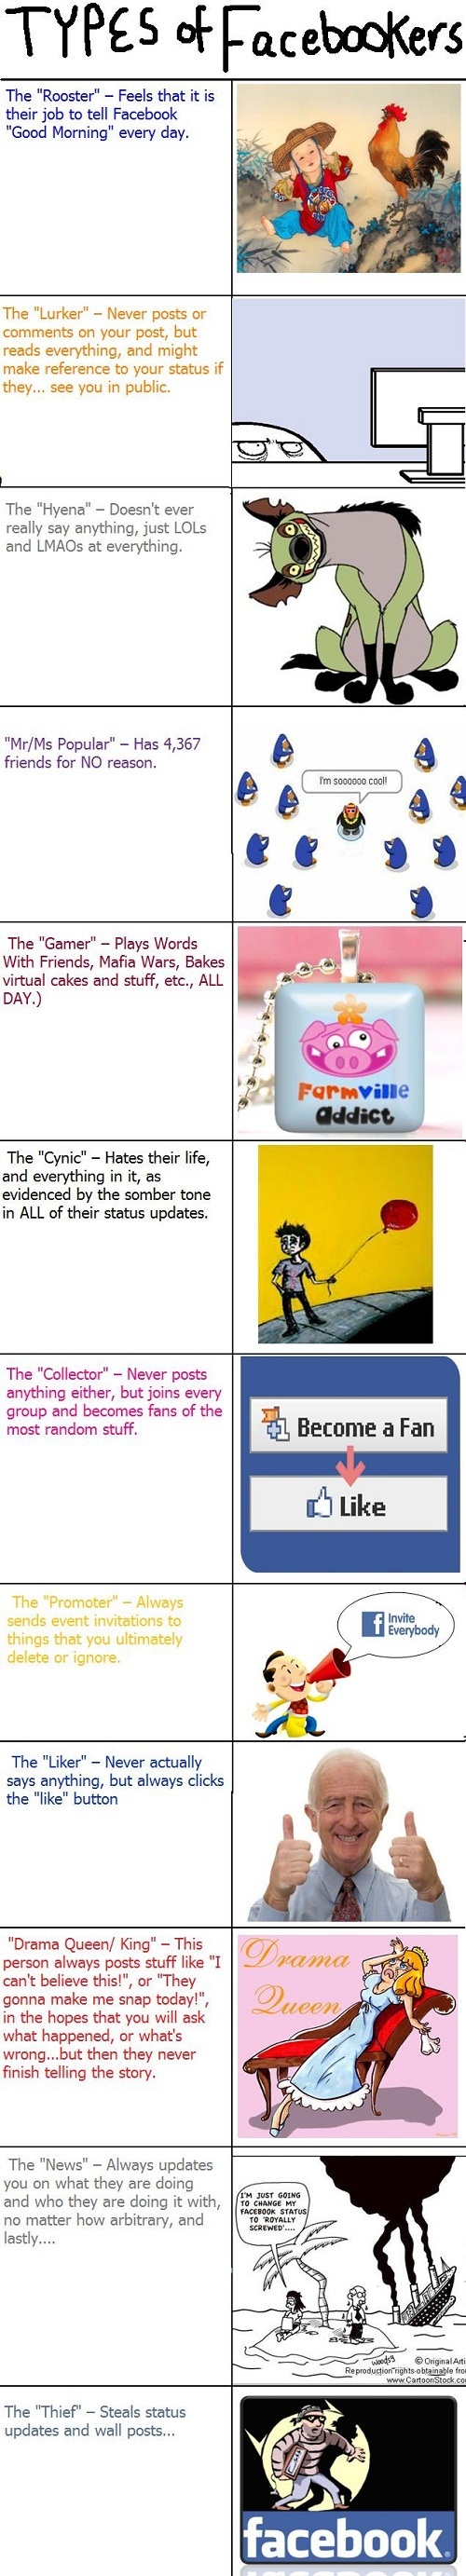 Types Of Facebookers